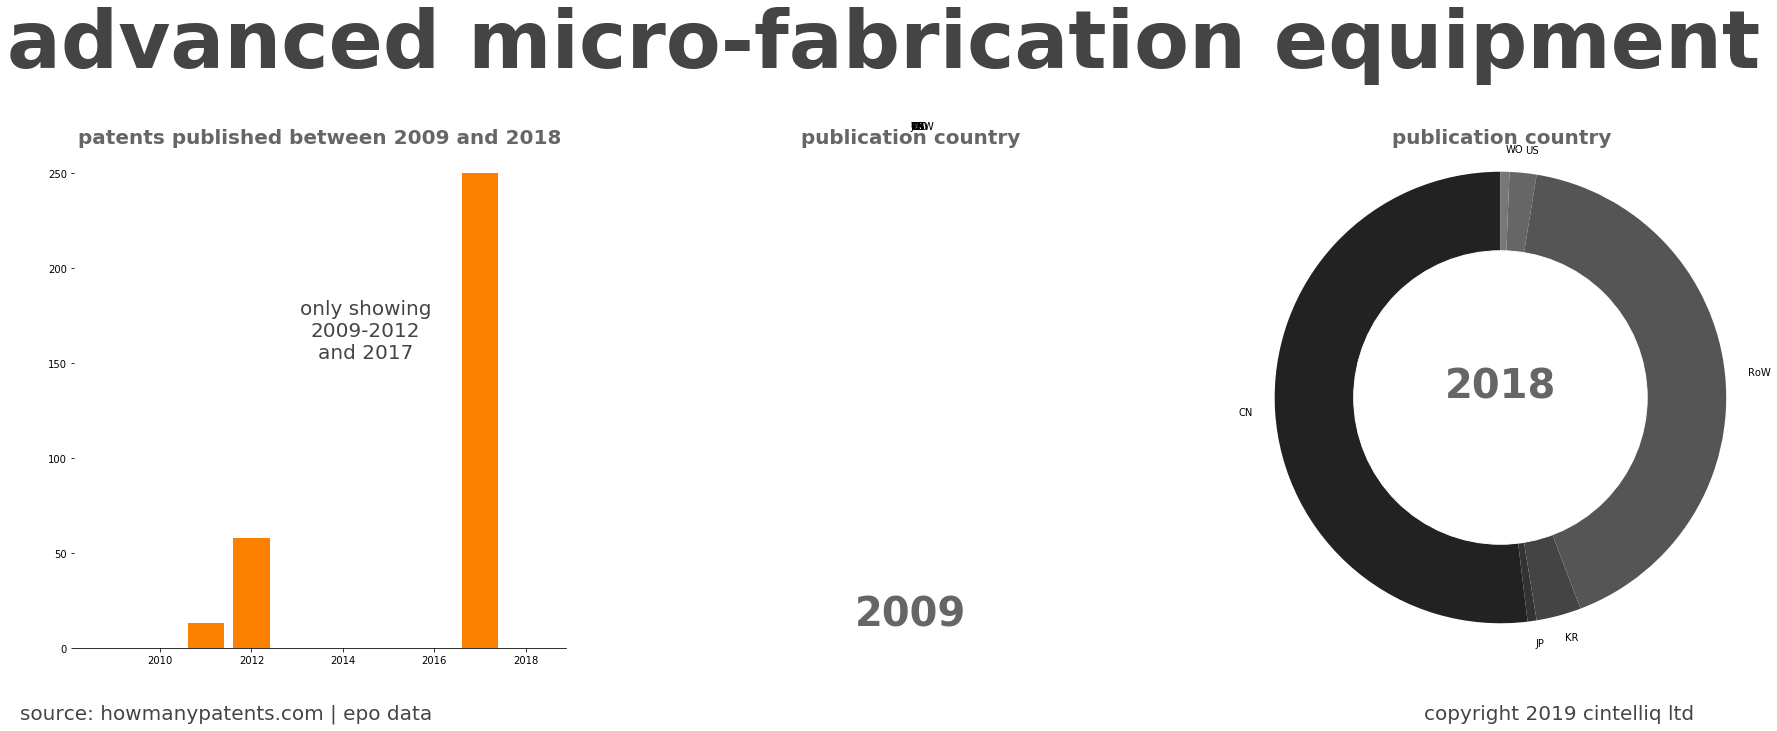 summary of patents for Advanced Micro-Fabrication Equipment